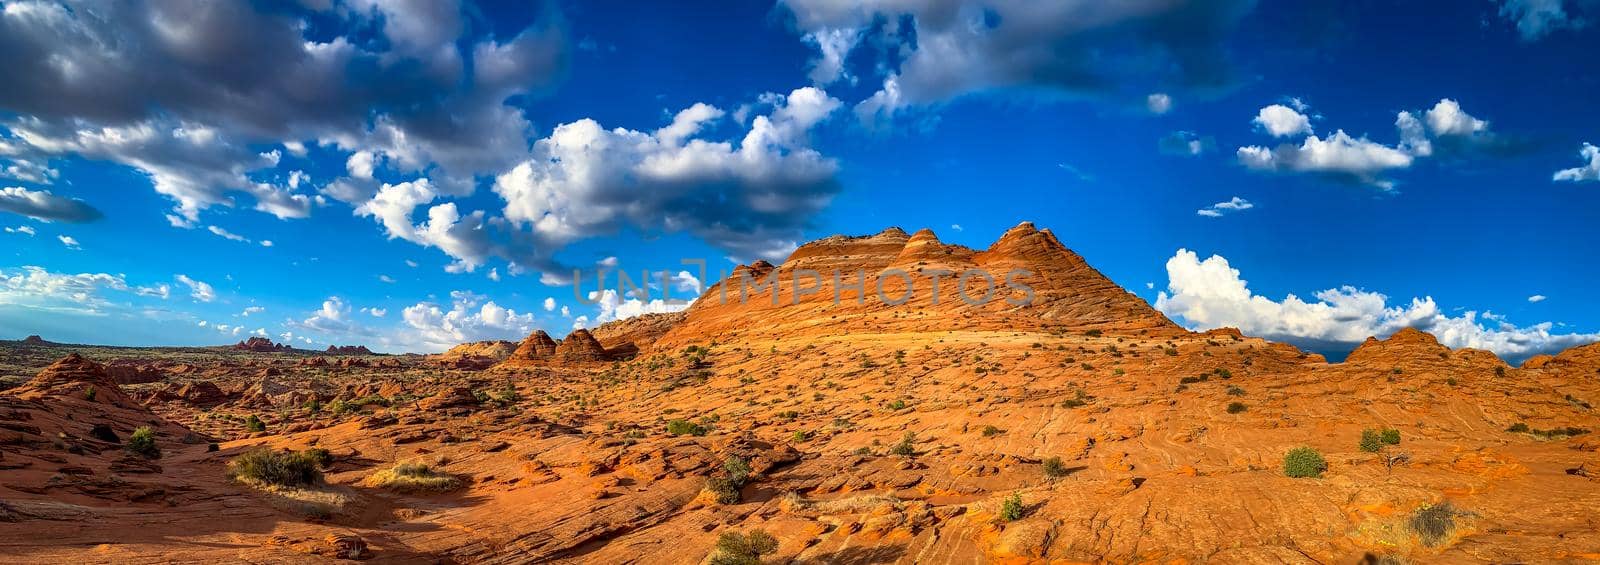 Sandstone rock formations located in Coyote Butte North, Arizona